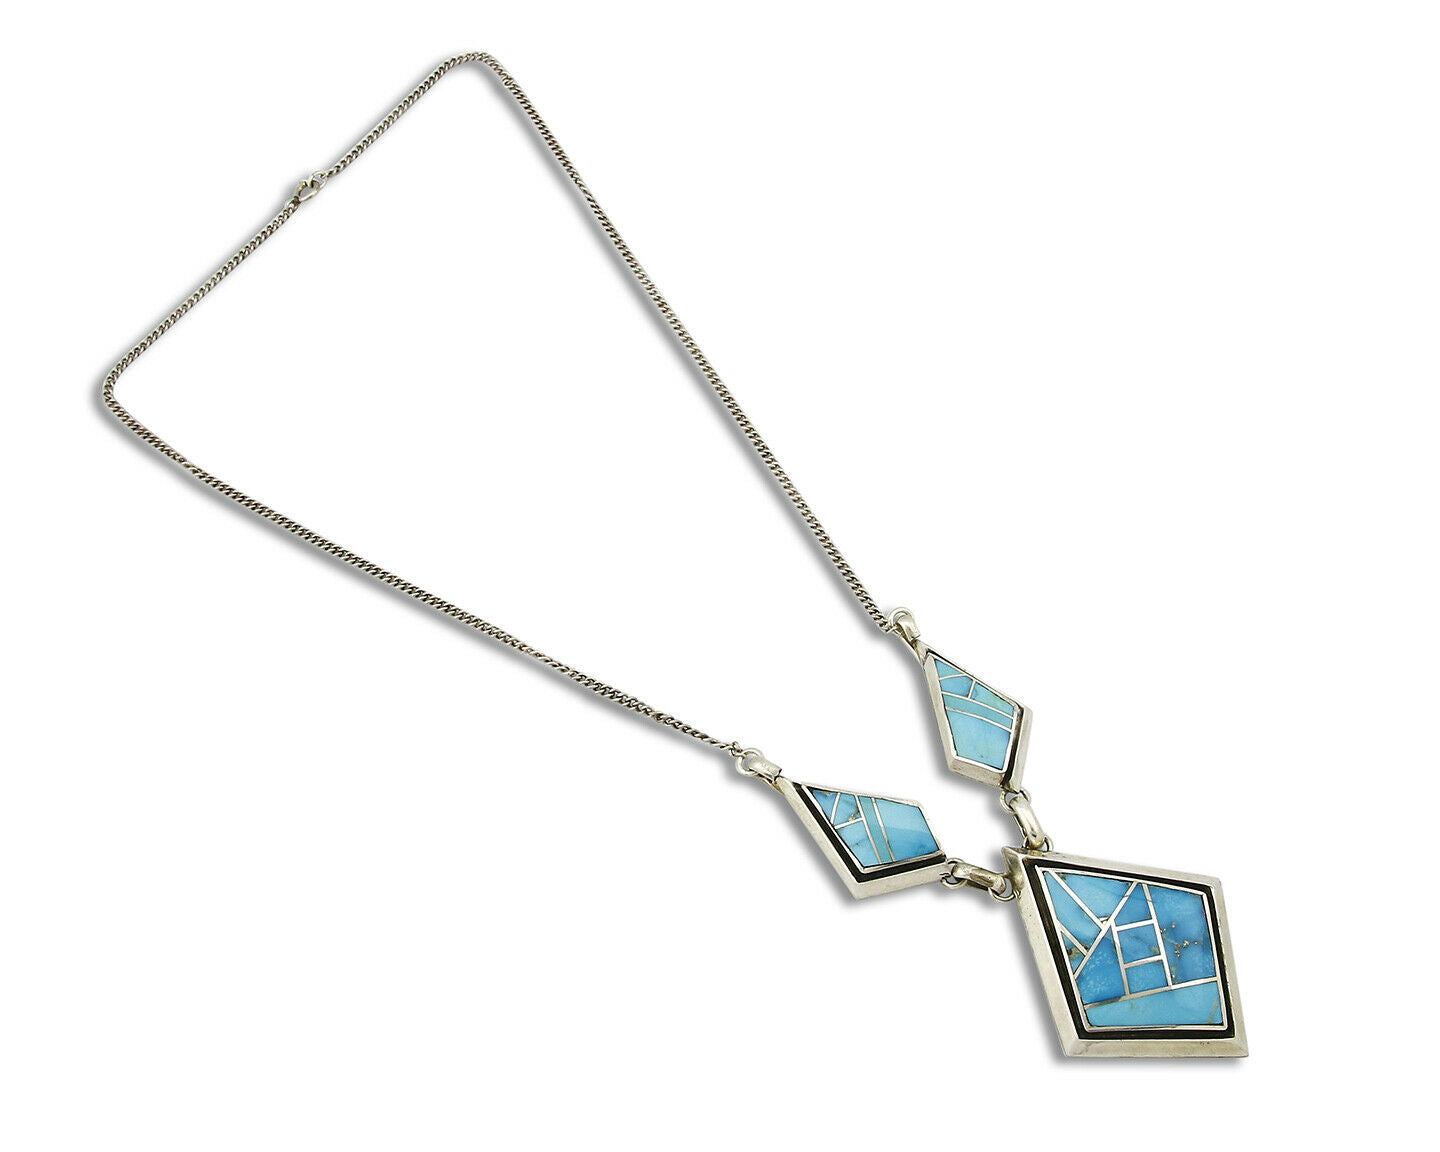 Women's Navajo Inlaid Necklace .925 Silver Morenci Turquoise